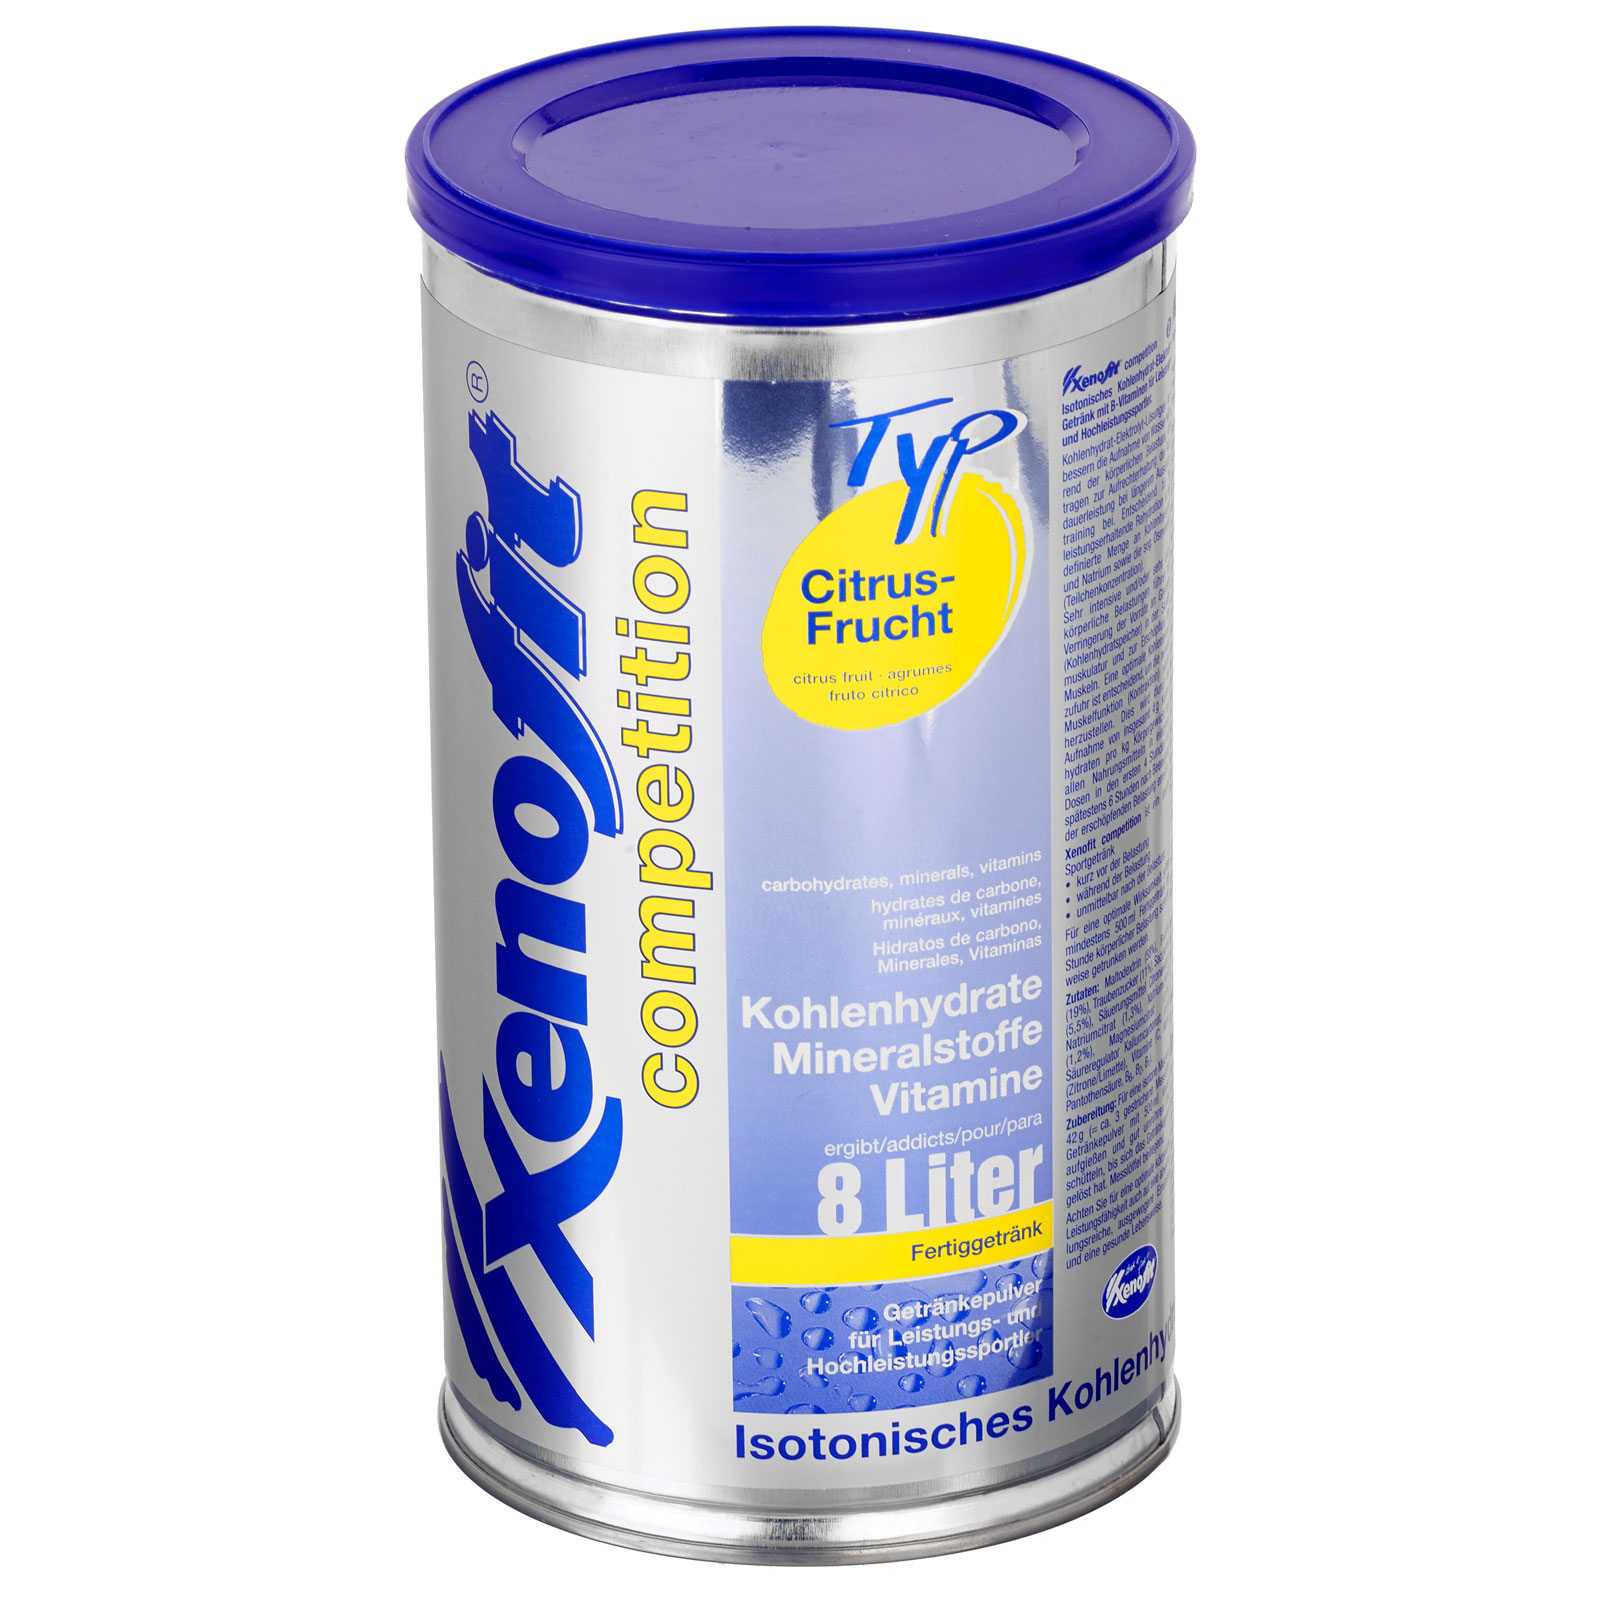 Productfoto van Xenofit Competition Citrus Fruit - Isotonic Carbohydrate Drink - 672g